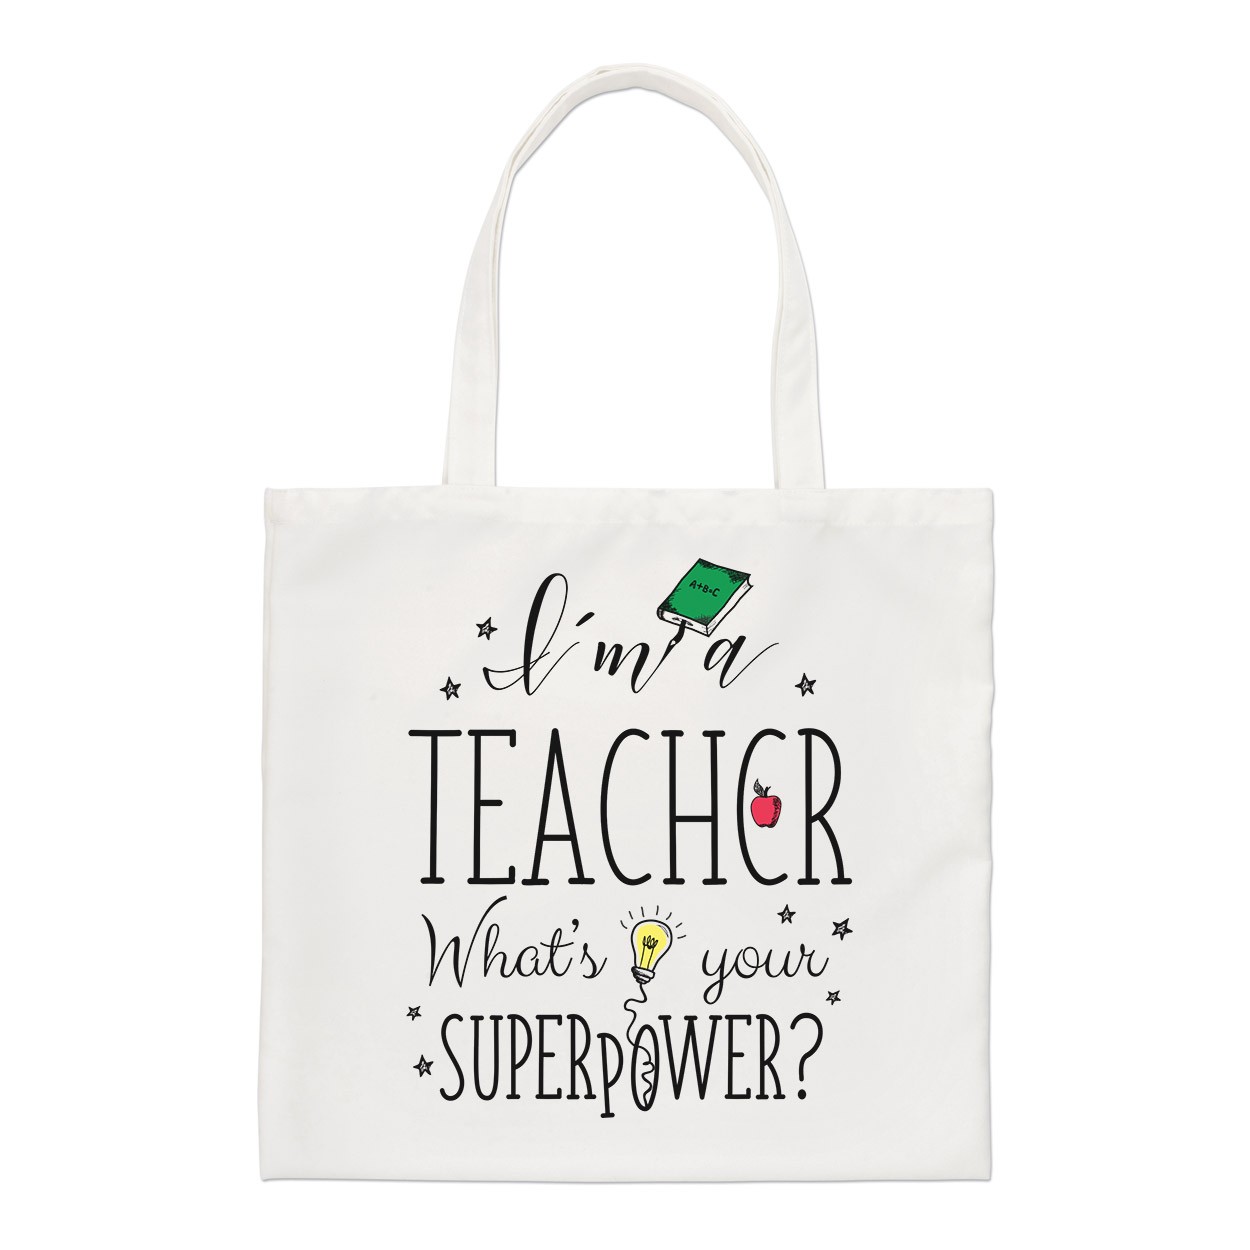 I'm A Teacher What's Your Superpower Regular Tote Bag